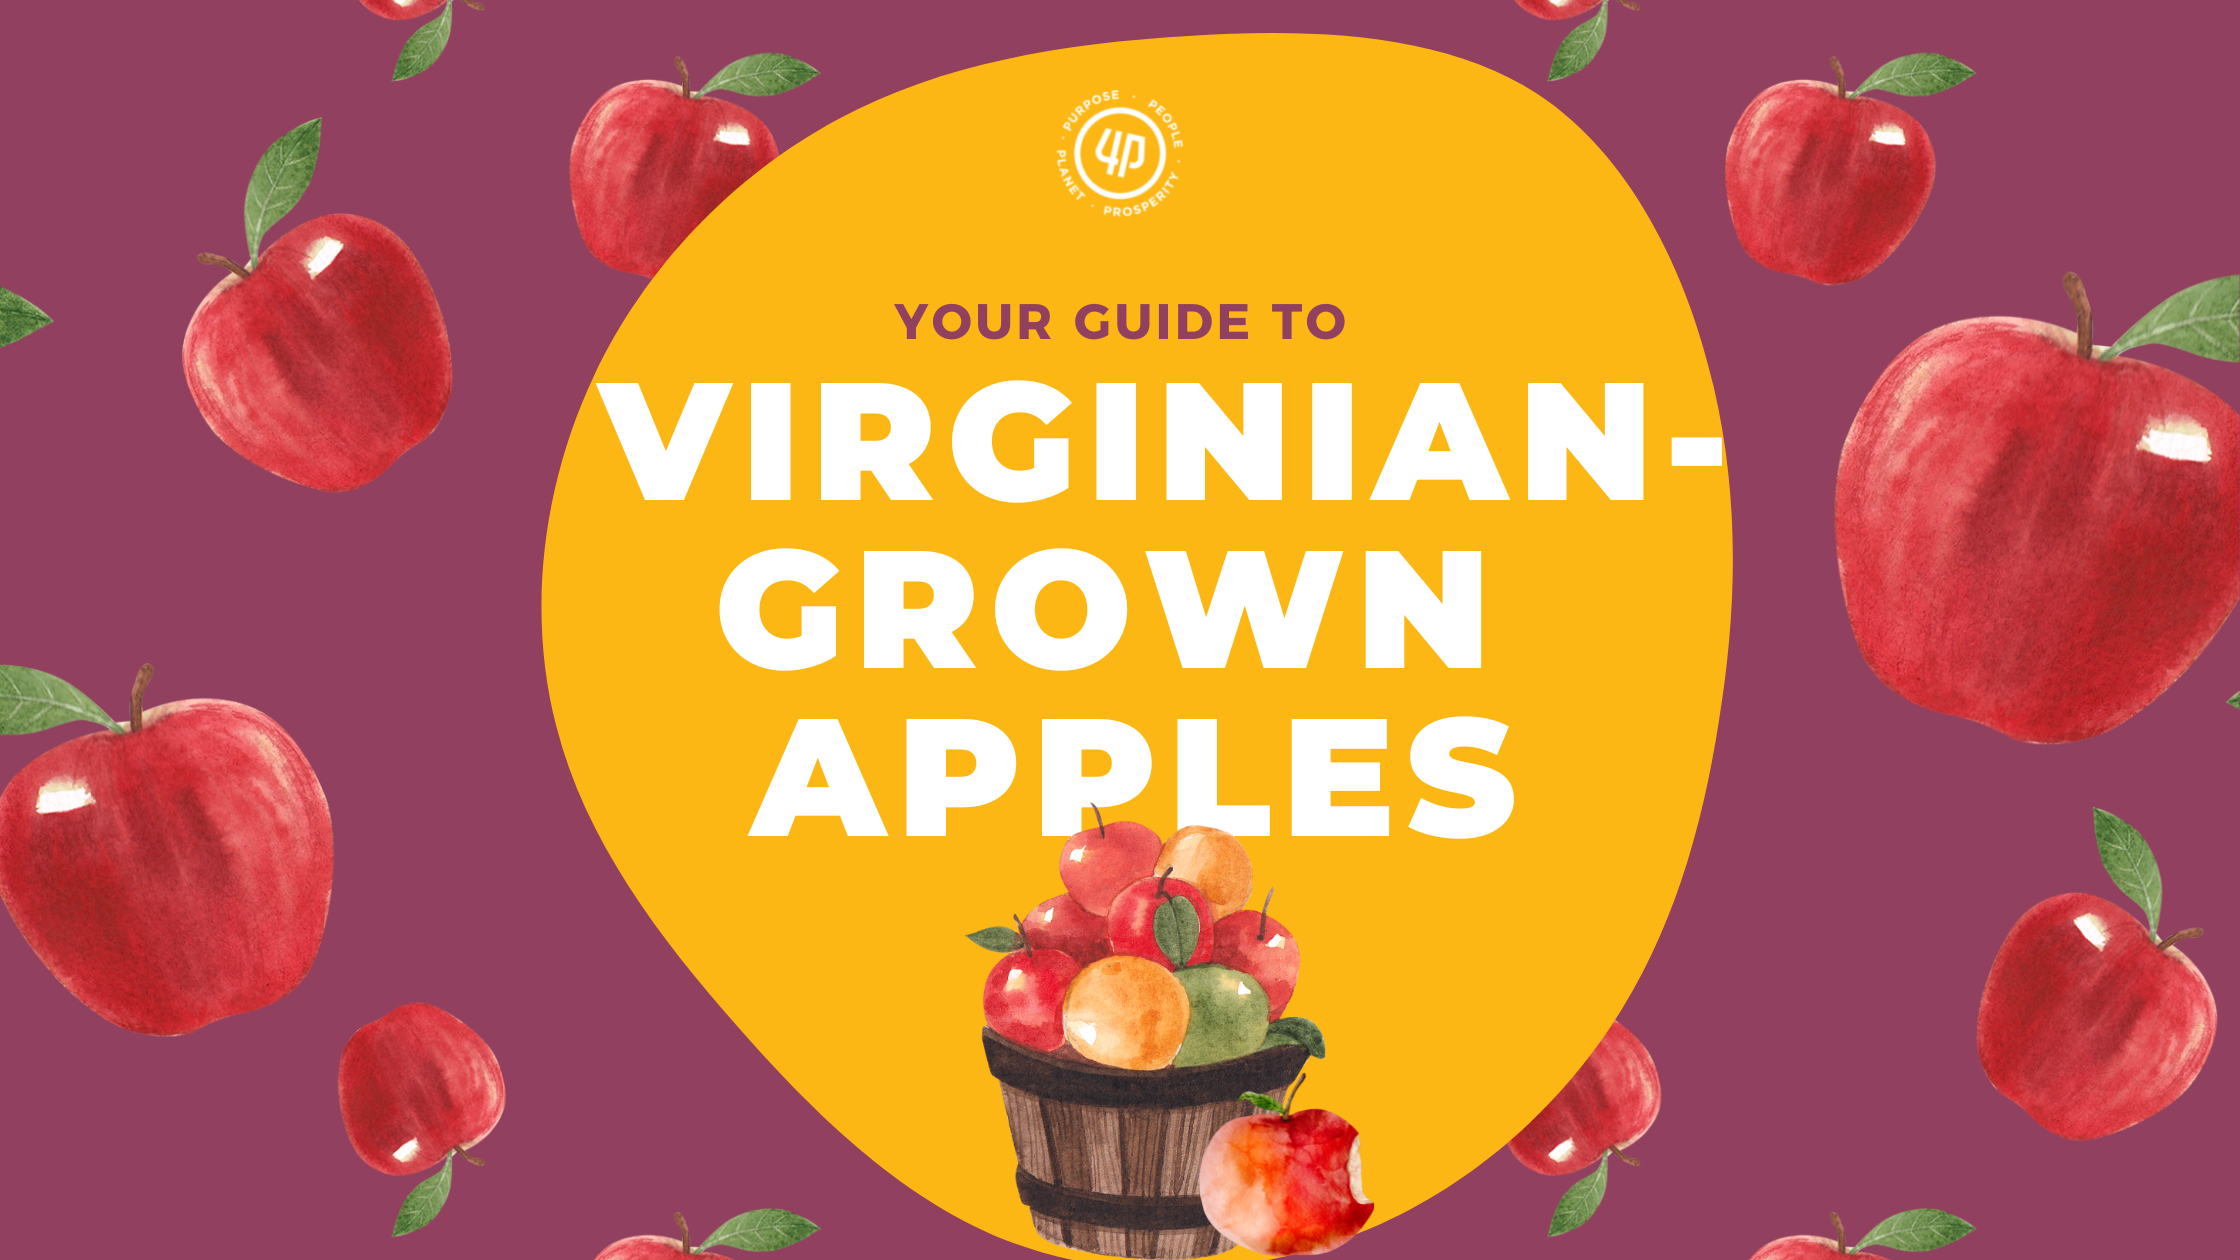 Apple-ly Ever After: A Tale of the Best Virginia-Grown Apples image